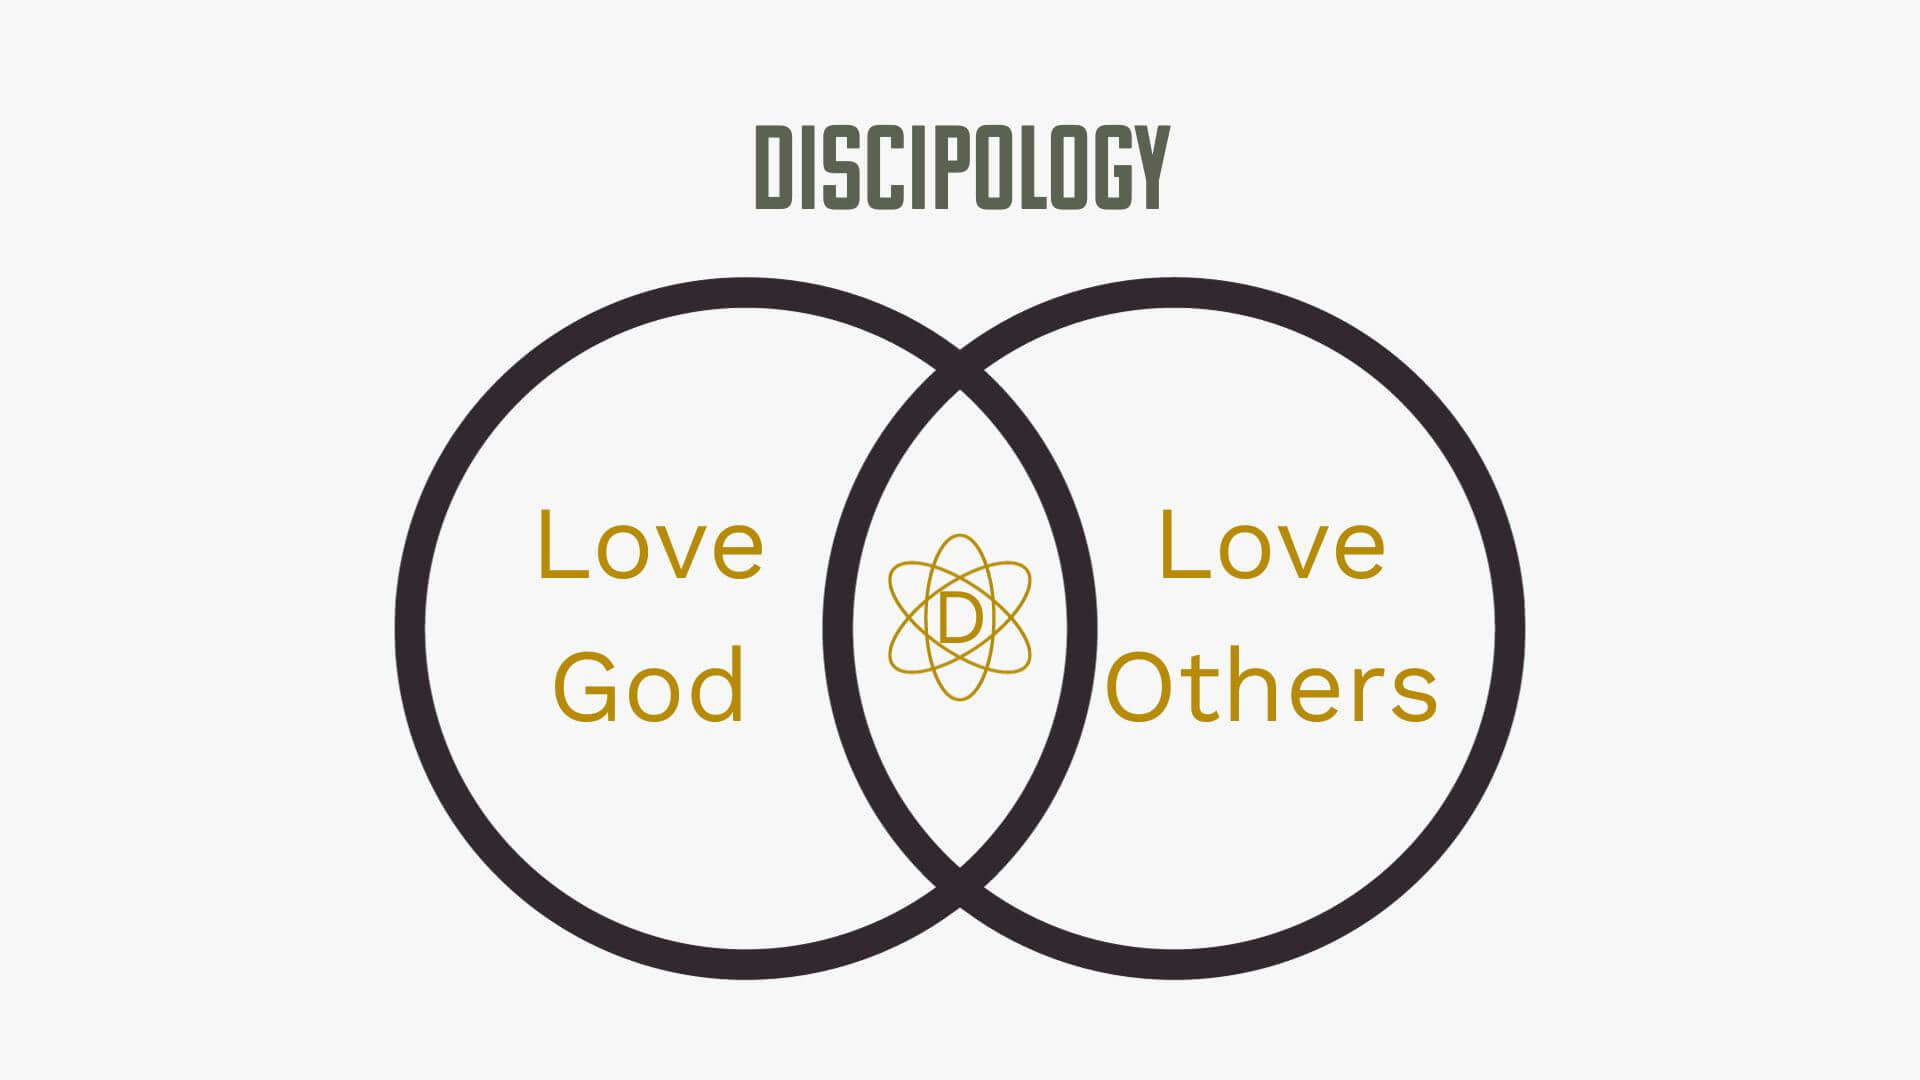 Introduction to Making Disciples - Newbreed Training